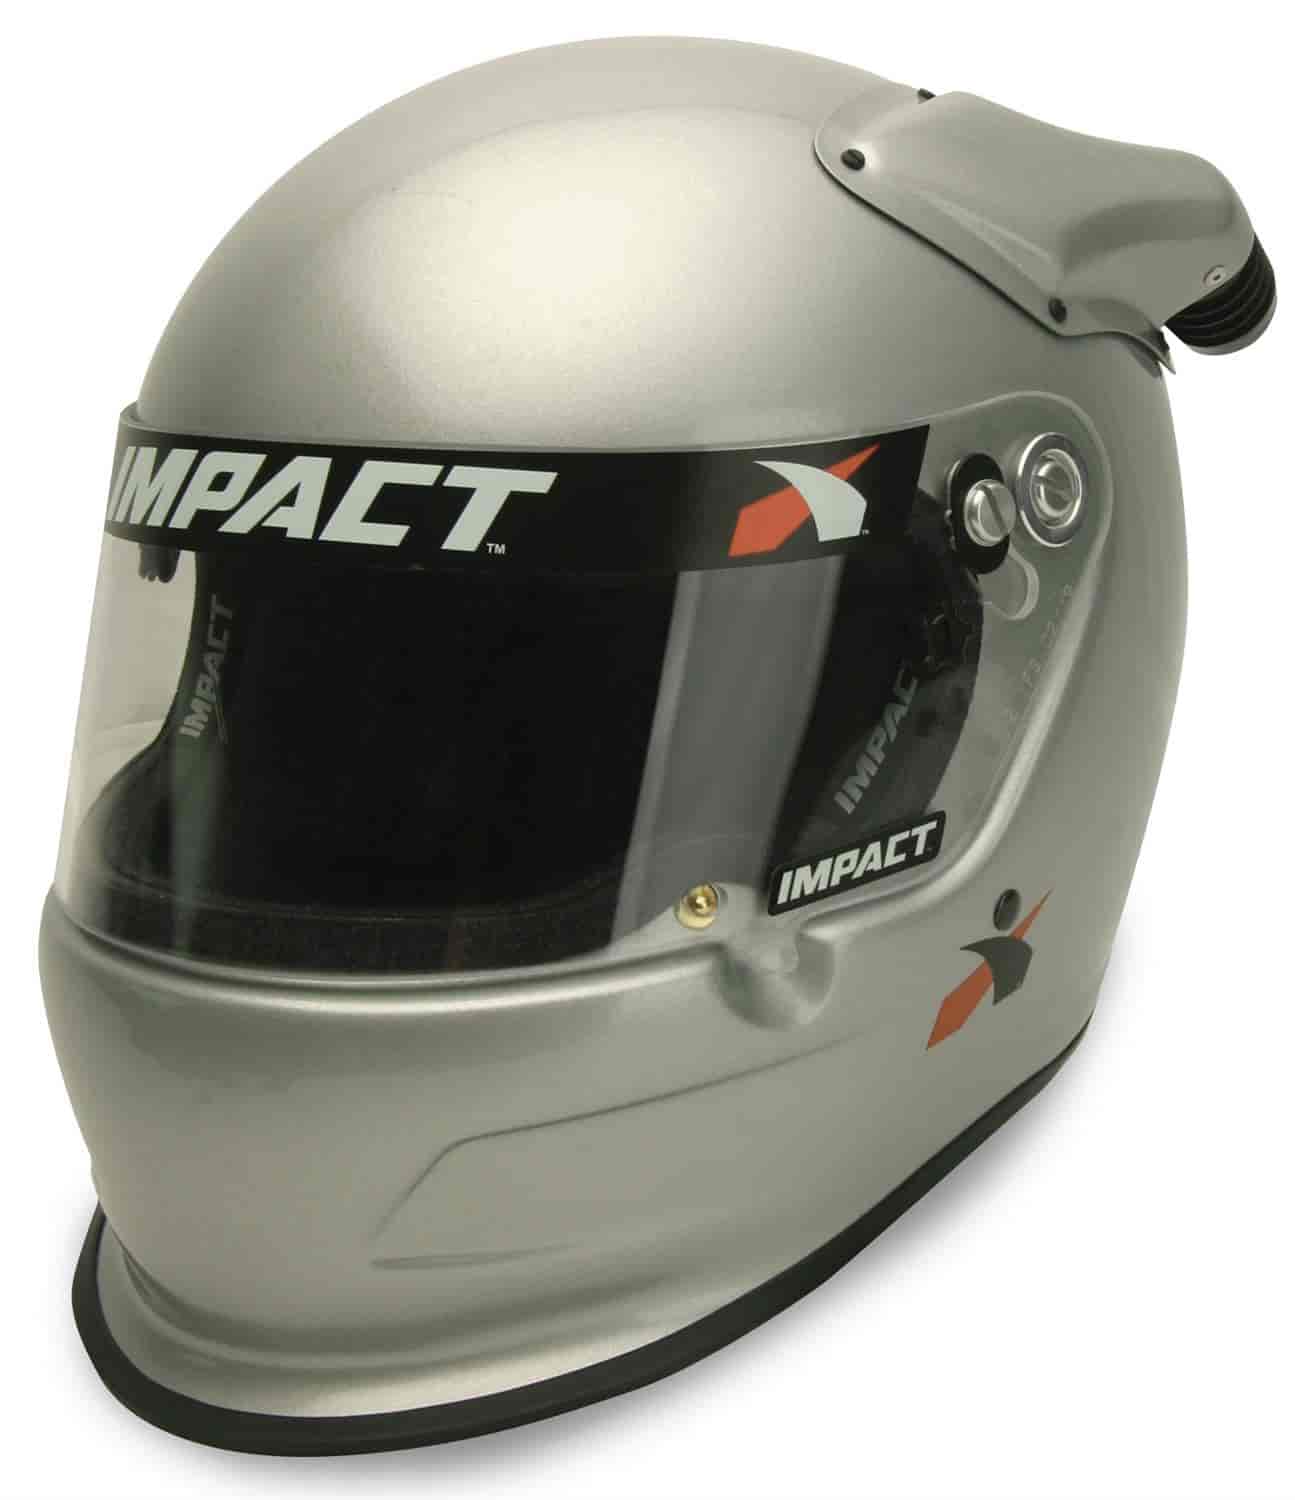 Super Charger OS20 Helmet SA2020 Certified